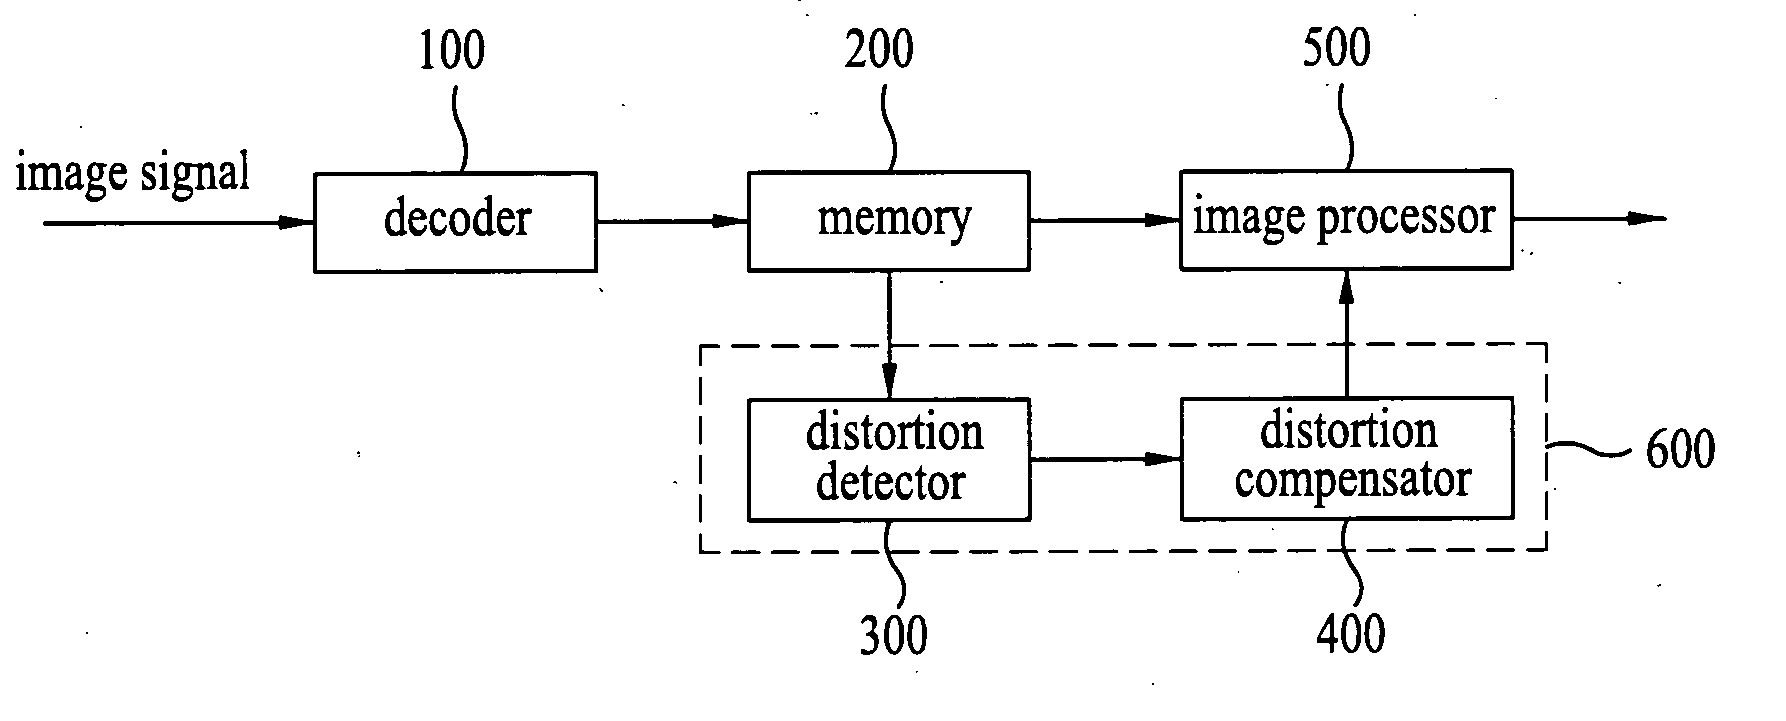 Apparatus and method for compensating images in display device